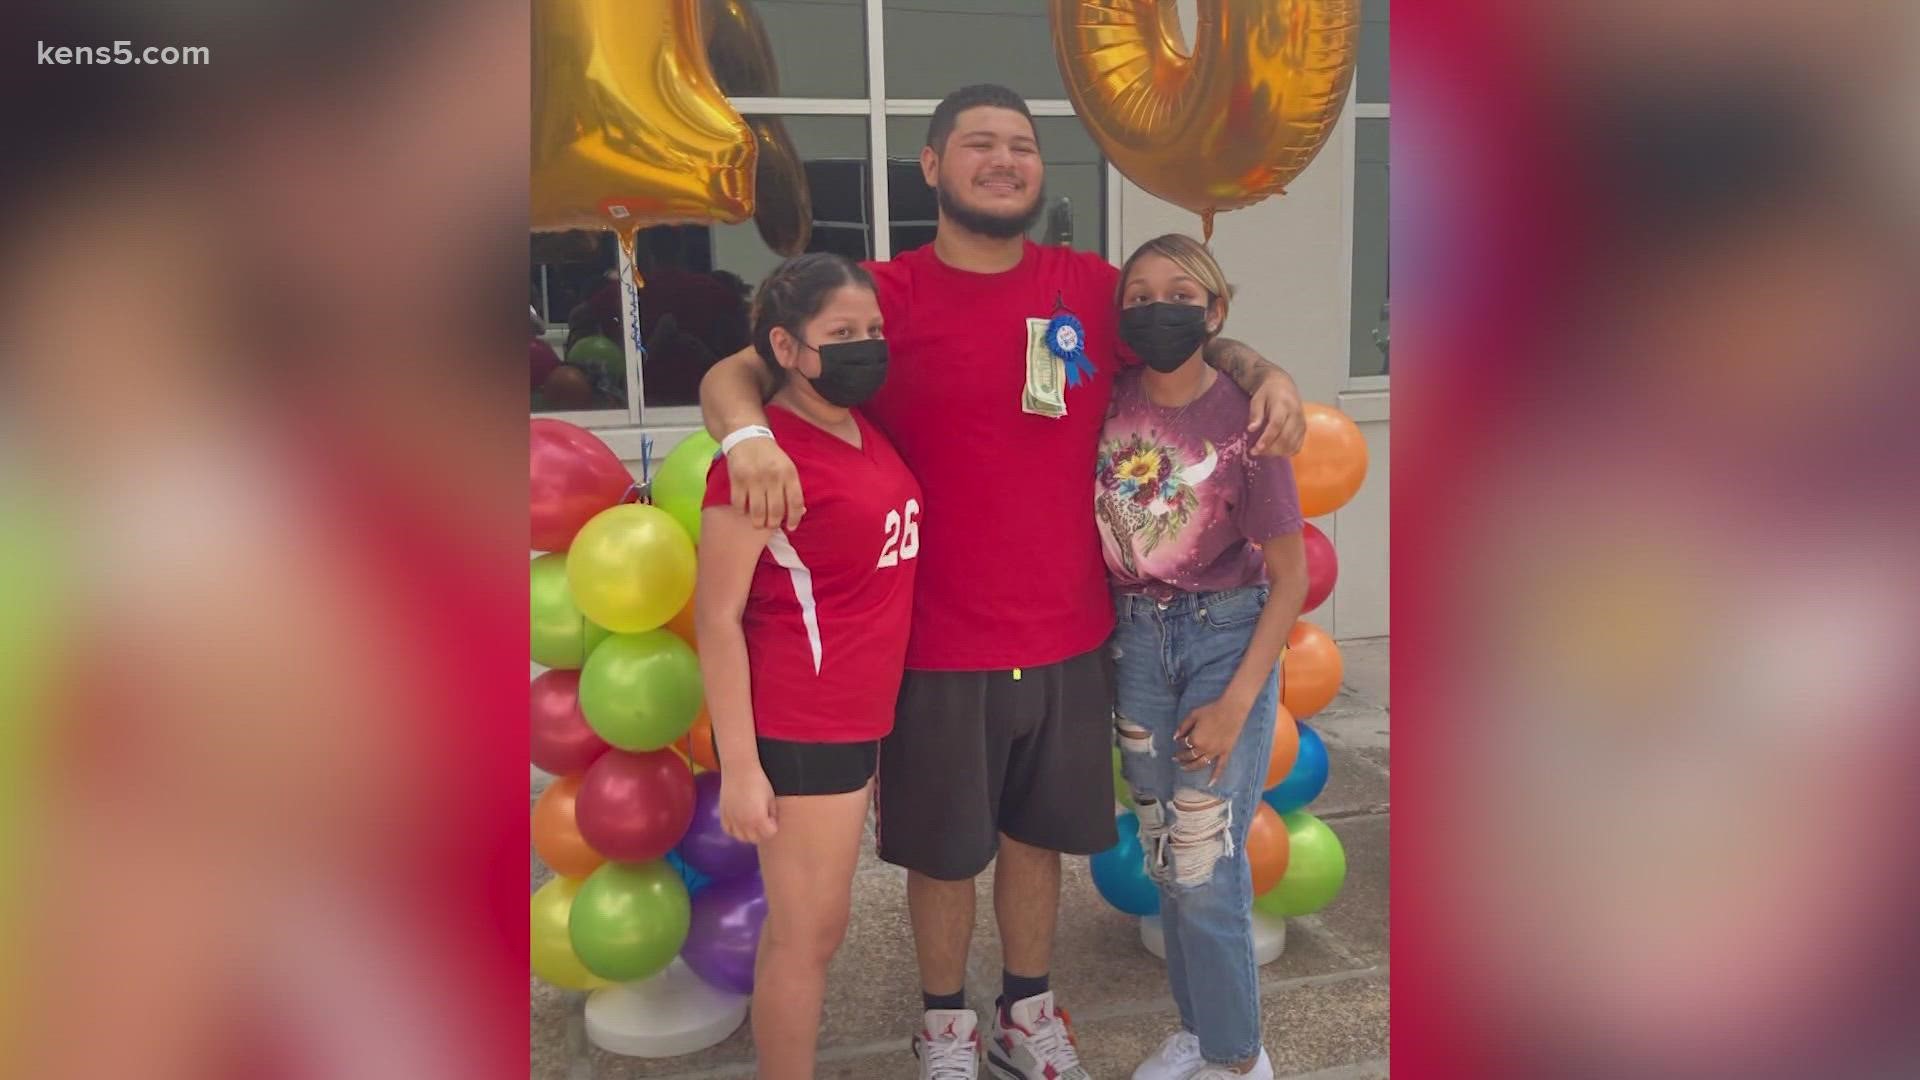 It's so hard as a mom to hold back your tears' | Single mom out of work  after son diagnosed with stage 4 cancer hours before 18th birthday | kens5. com